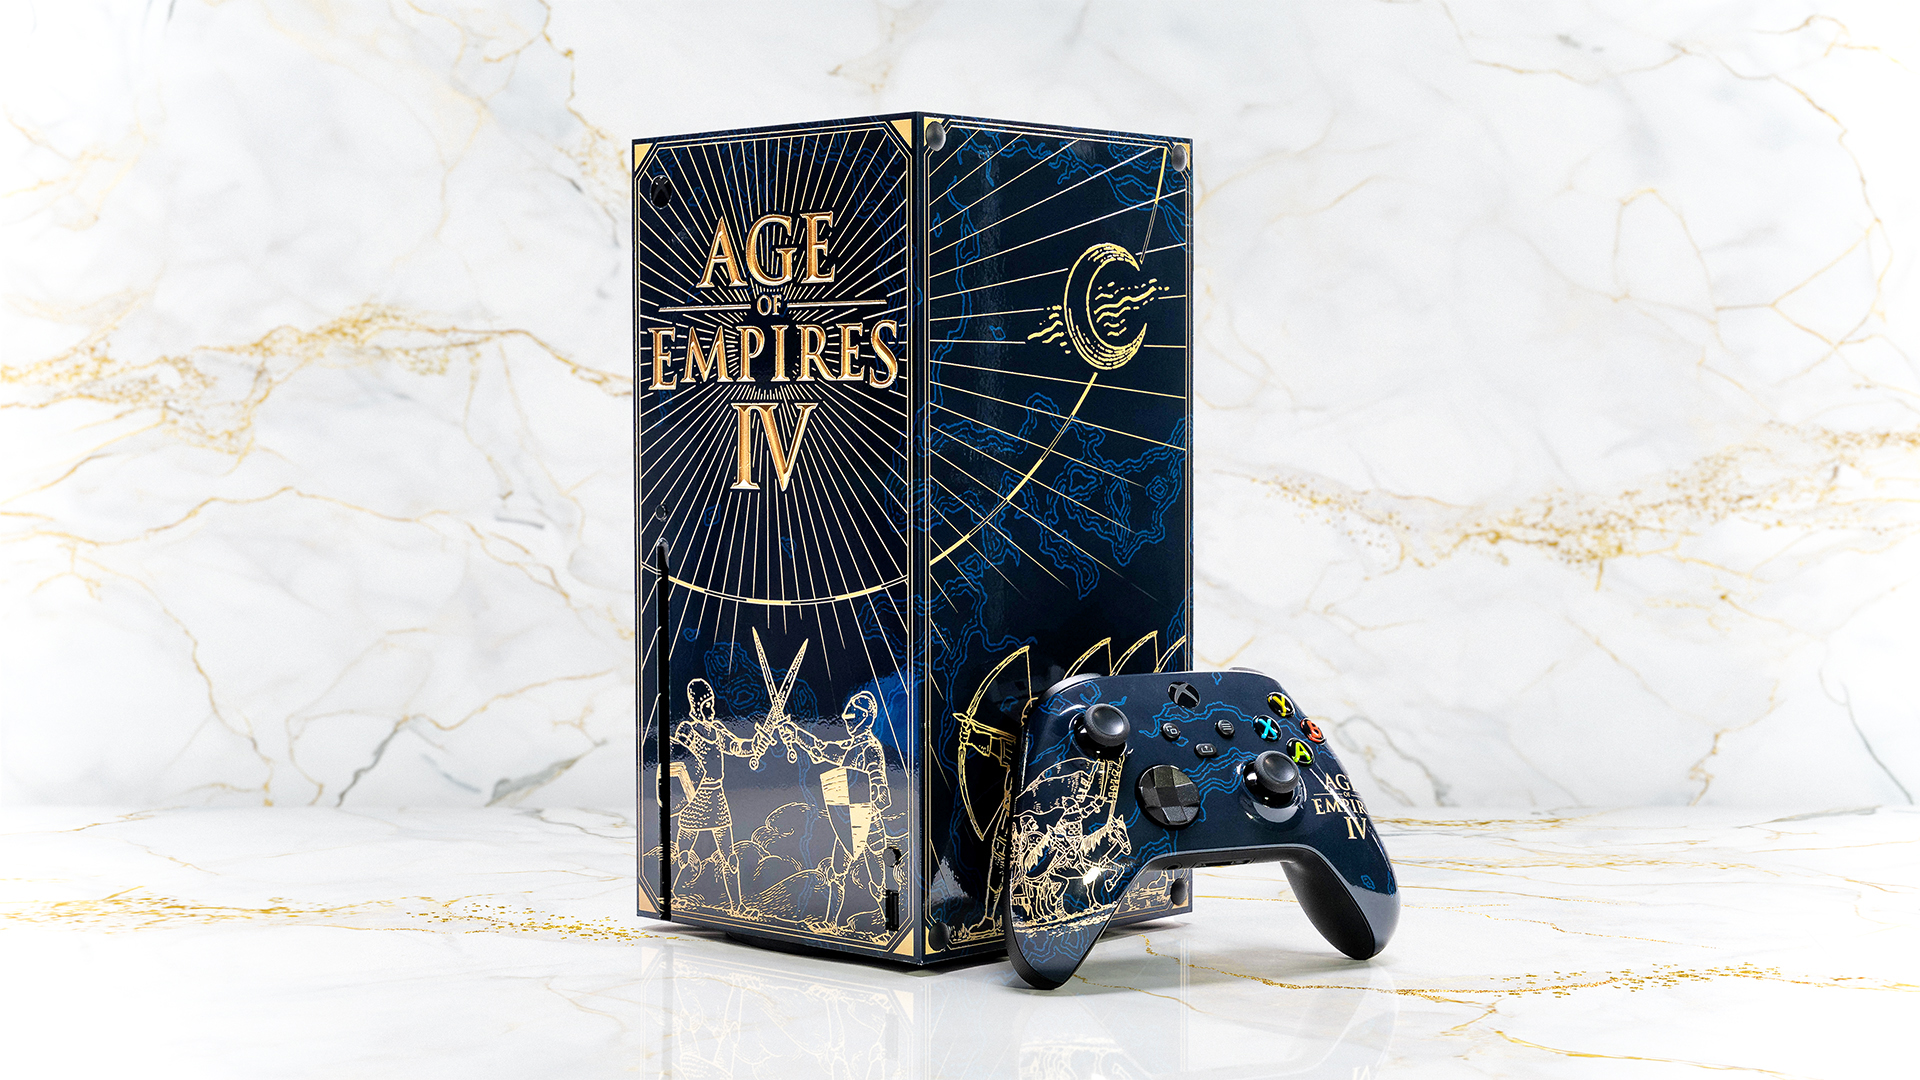 Age of Empires IV Custom Xbox Series X for the release of the game on Xbox consoles.